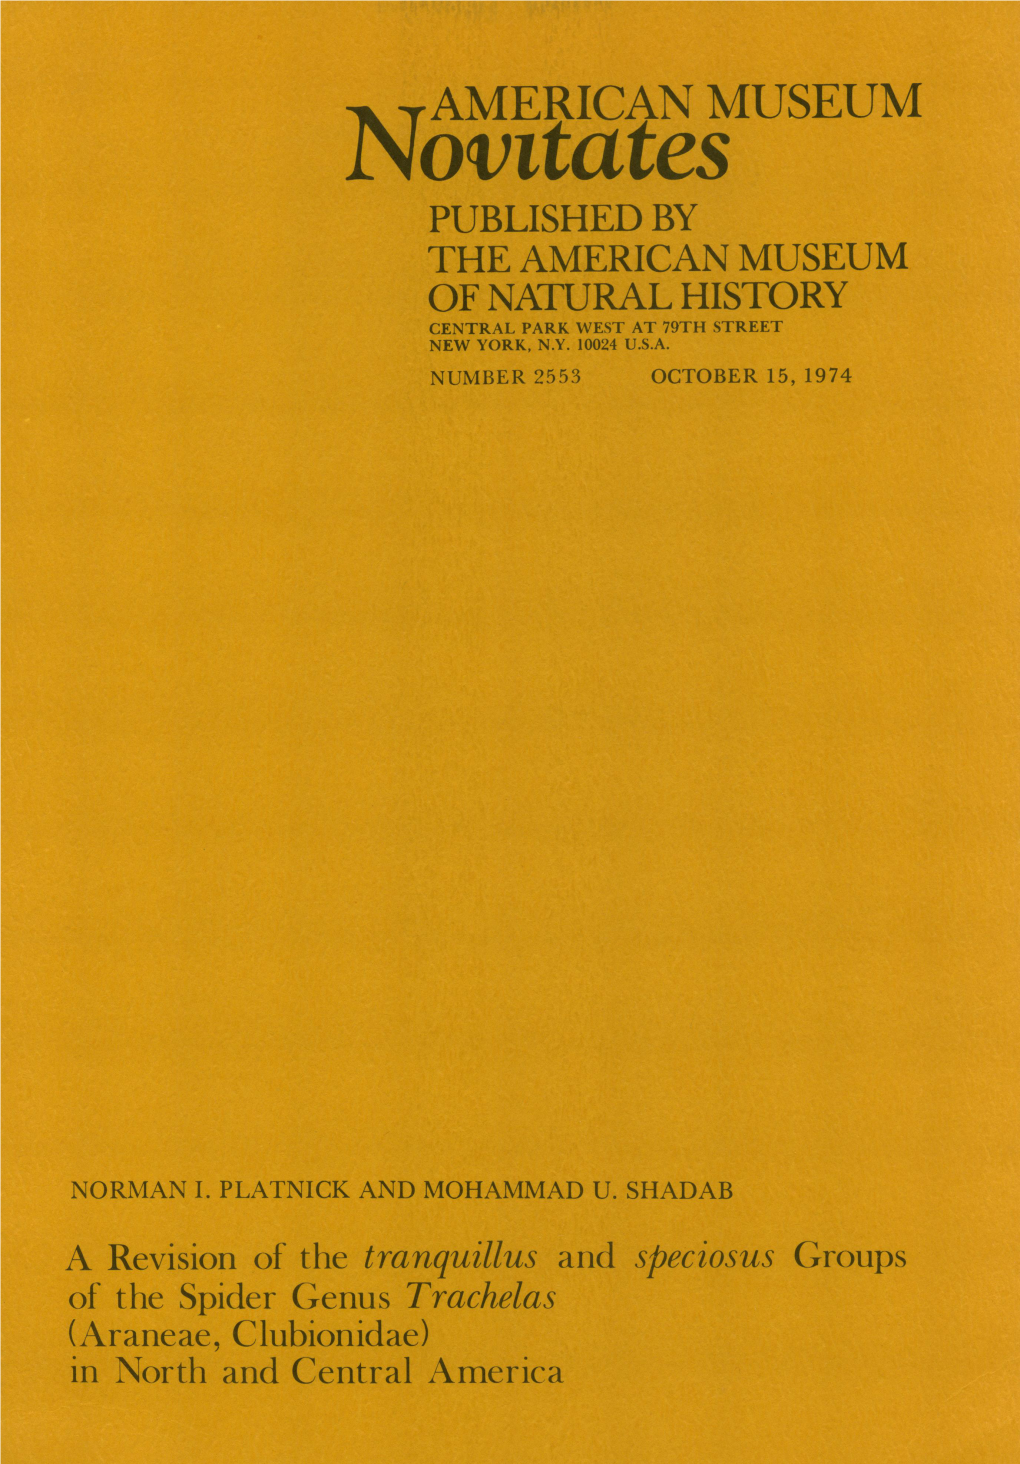 Novttates PUBLISHED by the AMERICAN MUSEUM of NATURAL HISTORY CENTRAL PARK WEST at 79TH STREET NEW YORK, N.Y